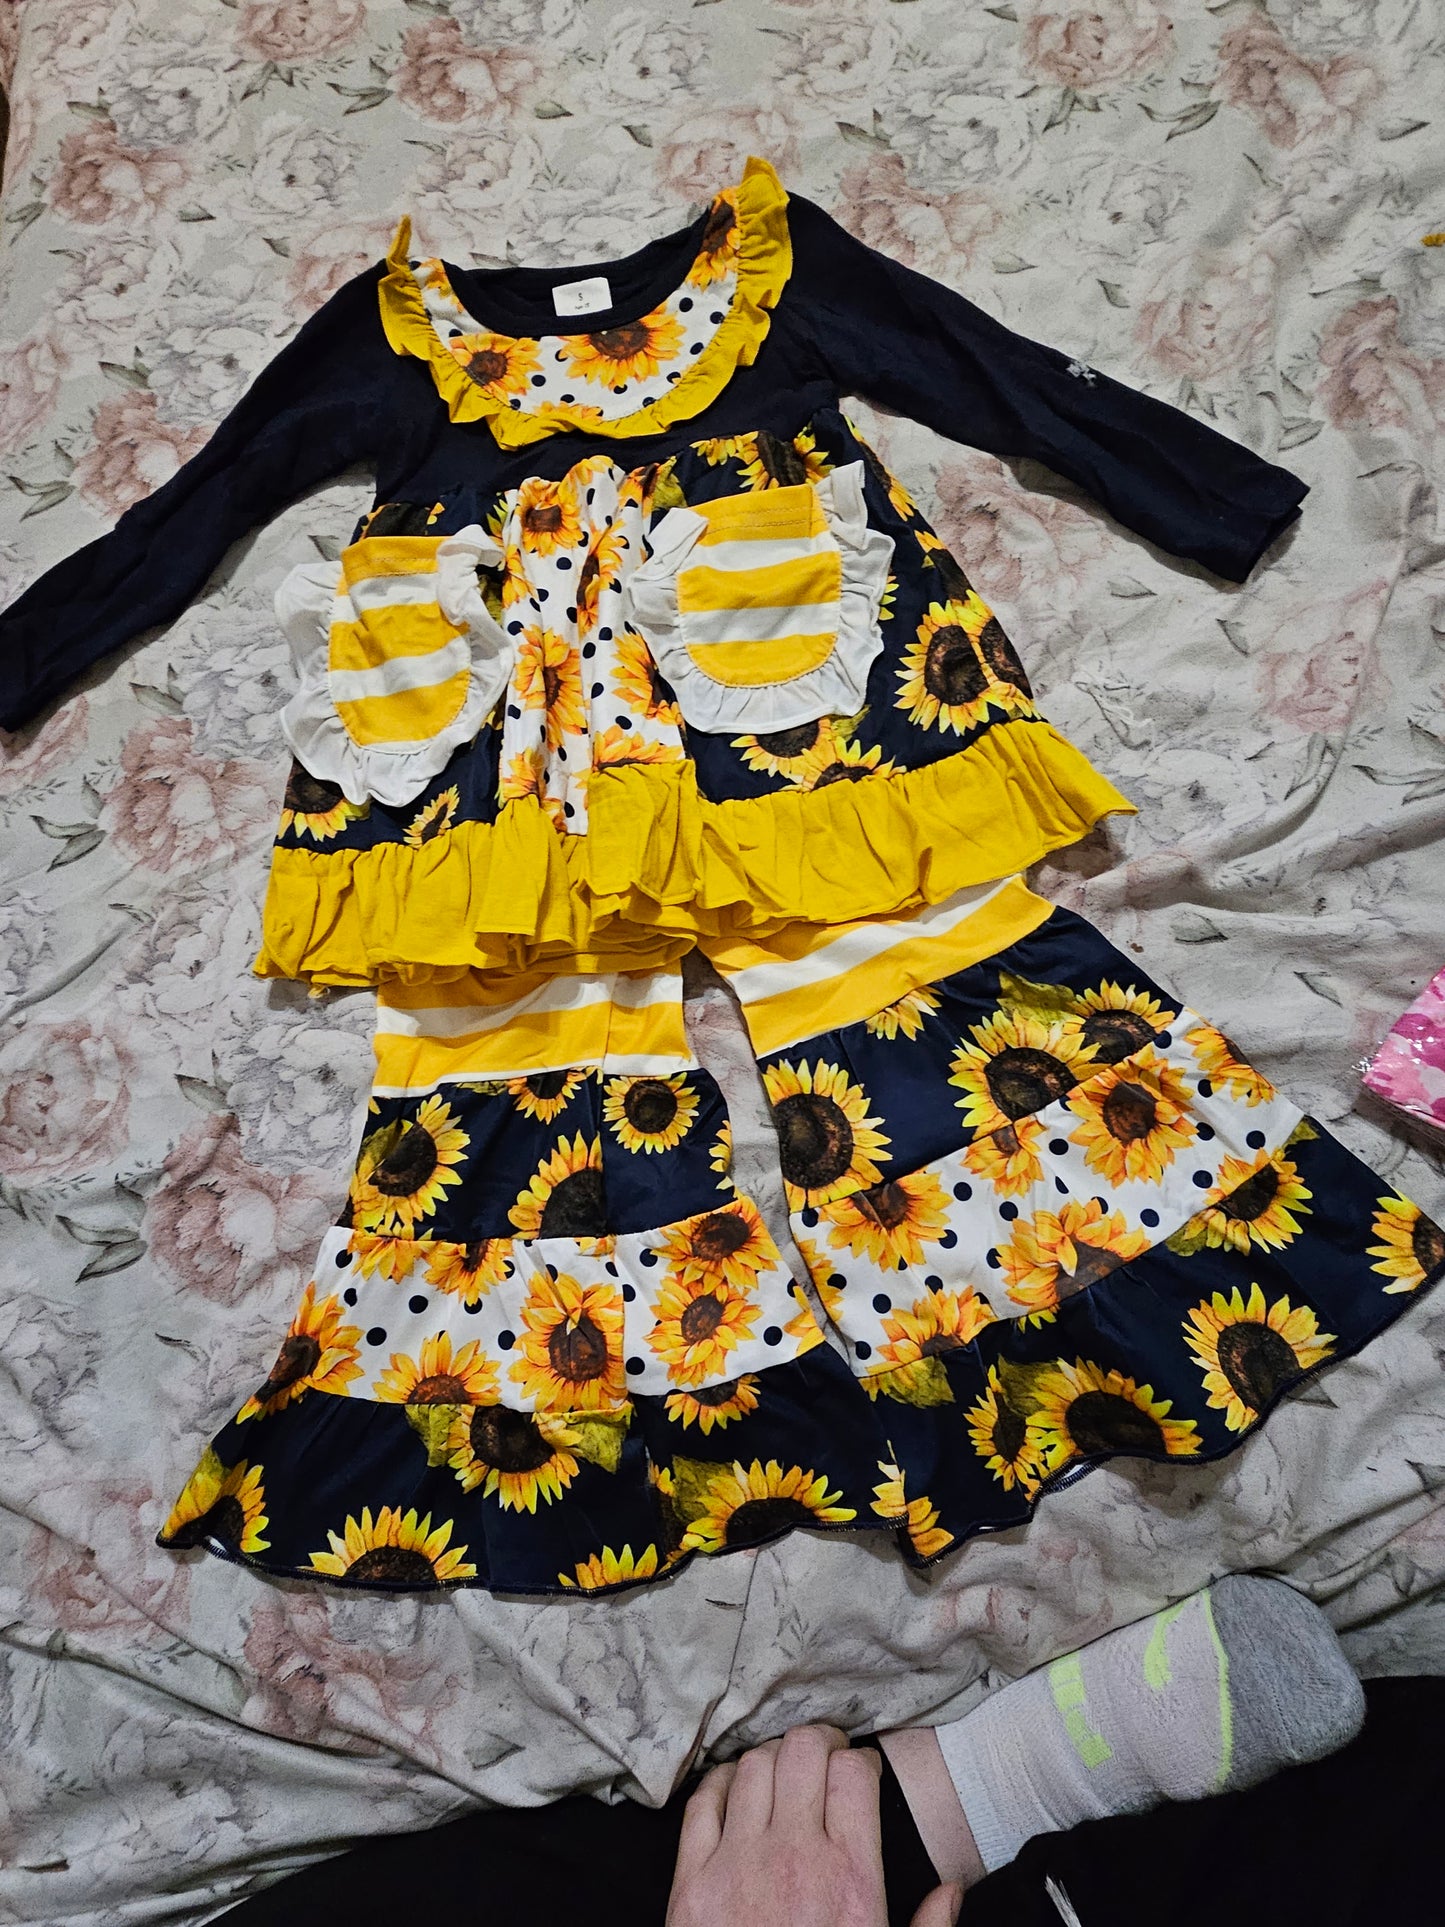 Navy and yellow sunflower outfit